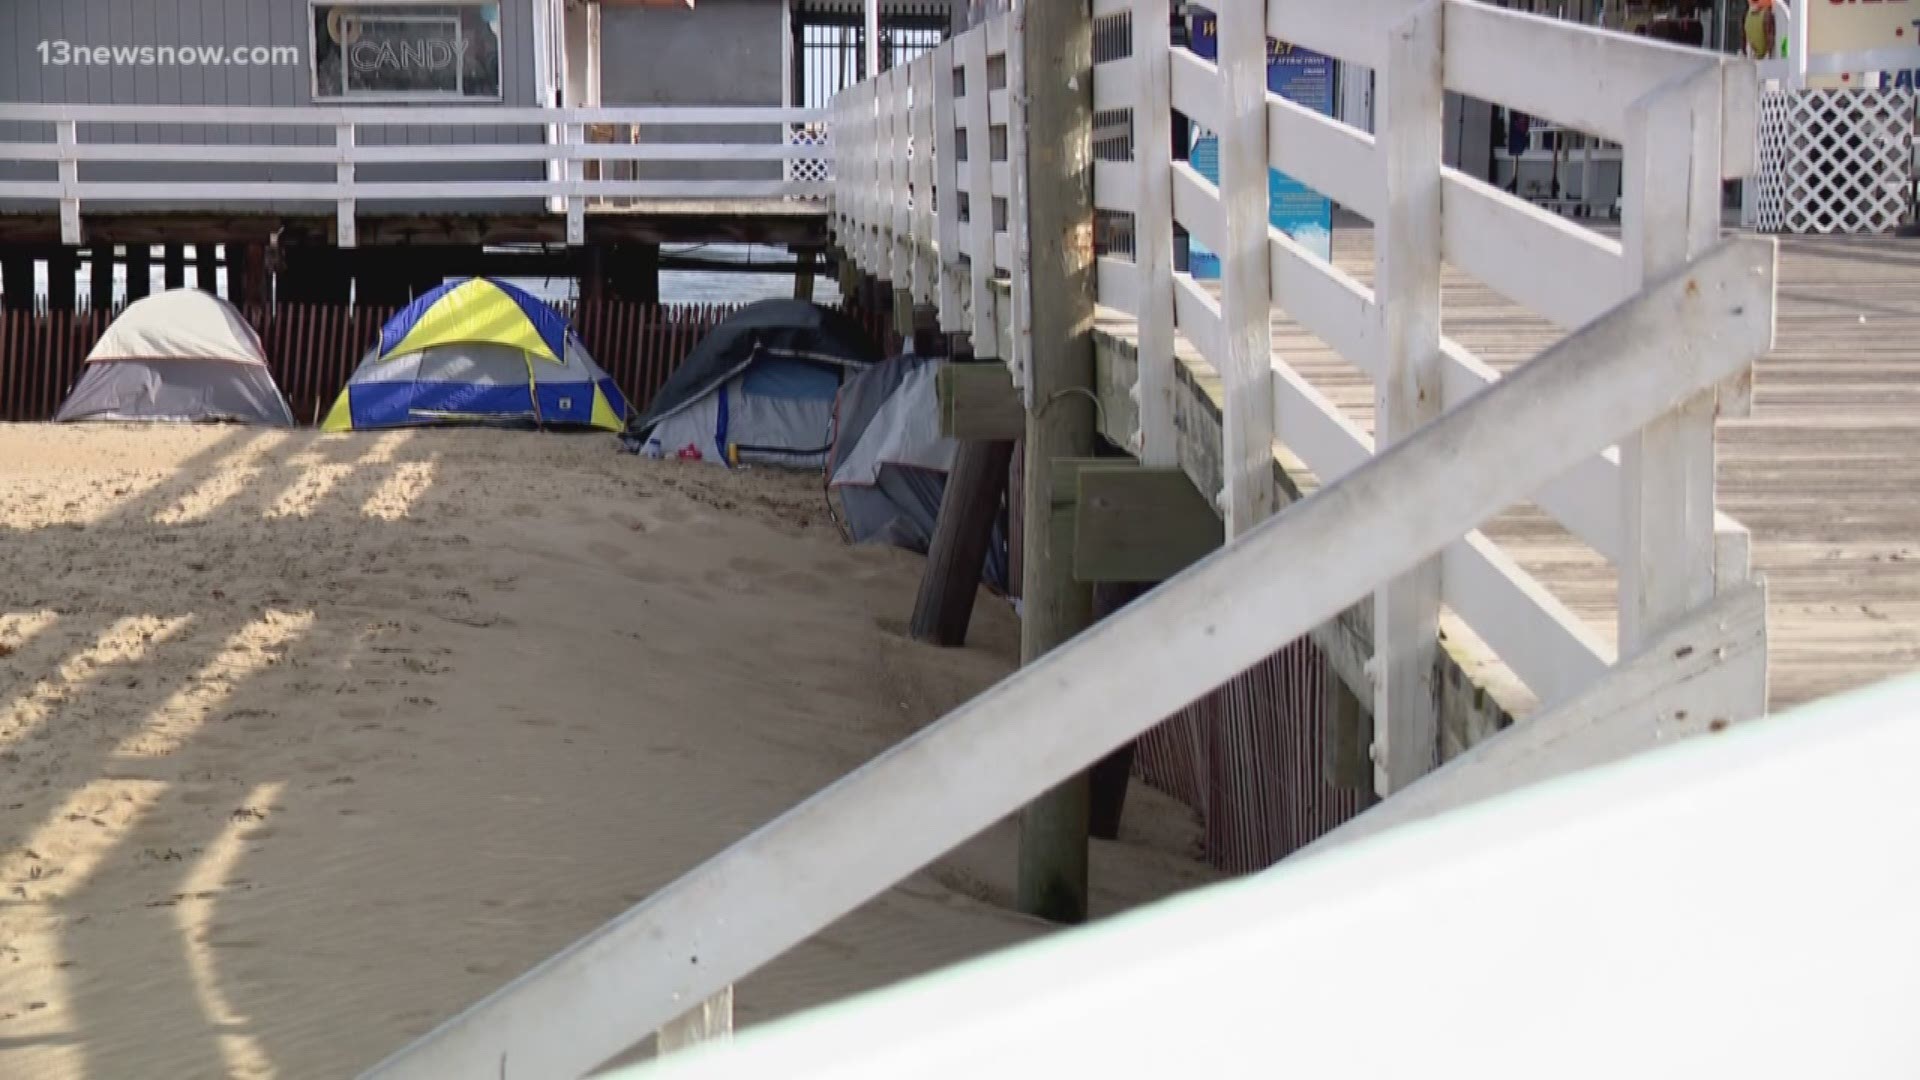 The Virginia Beach City Council is going to vote on a tent ban that bans tents on the beach from 8 p.m. to 8 a.m. This ban would affect the homeless in the area.